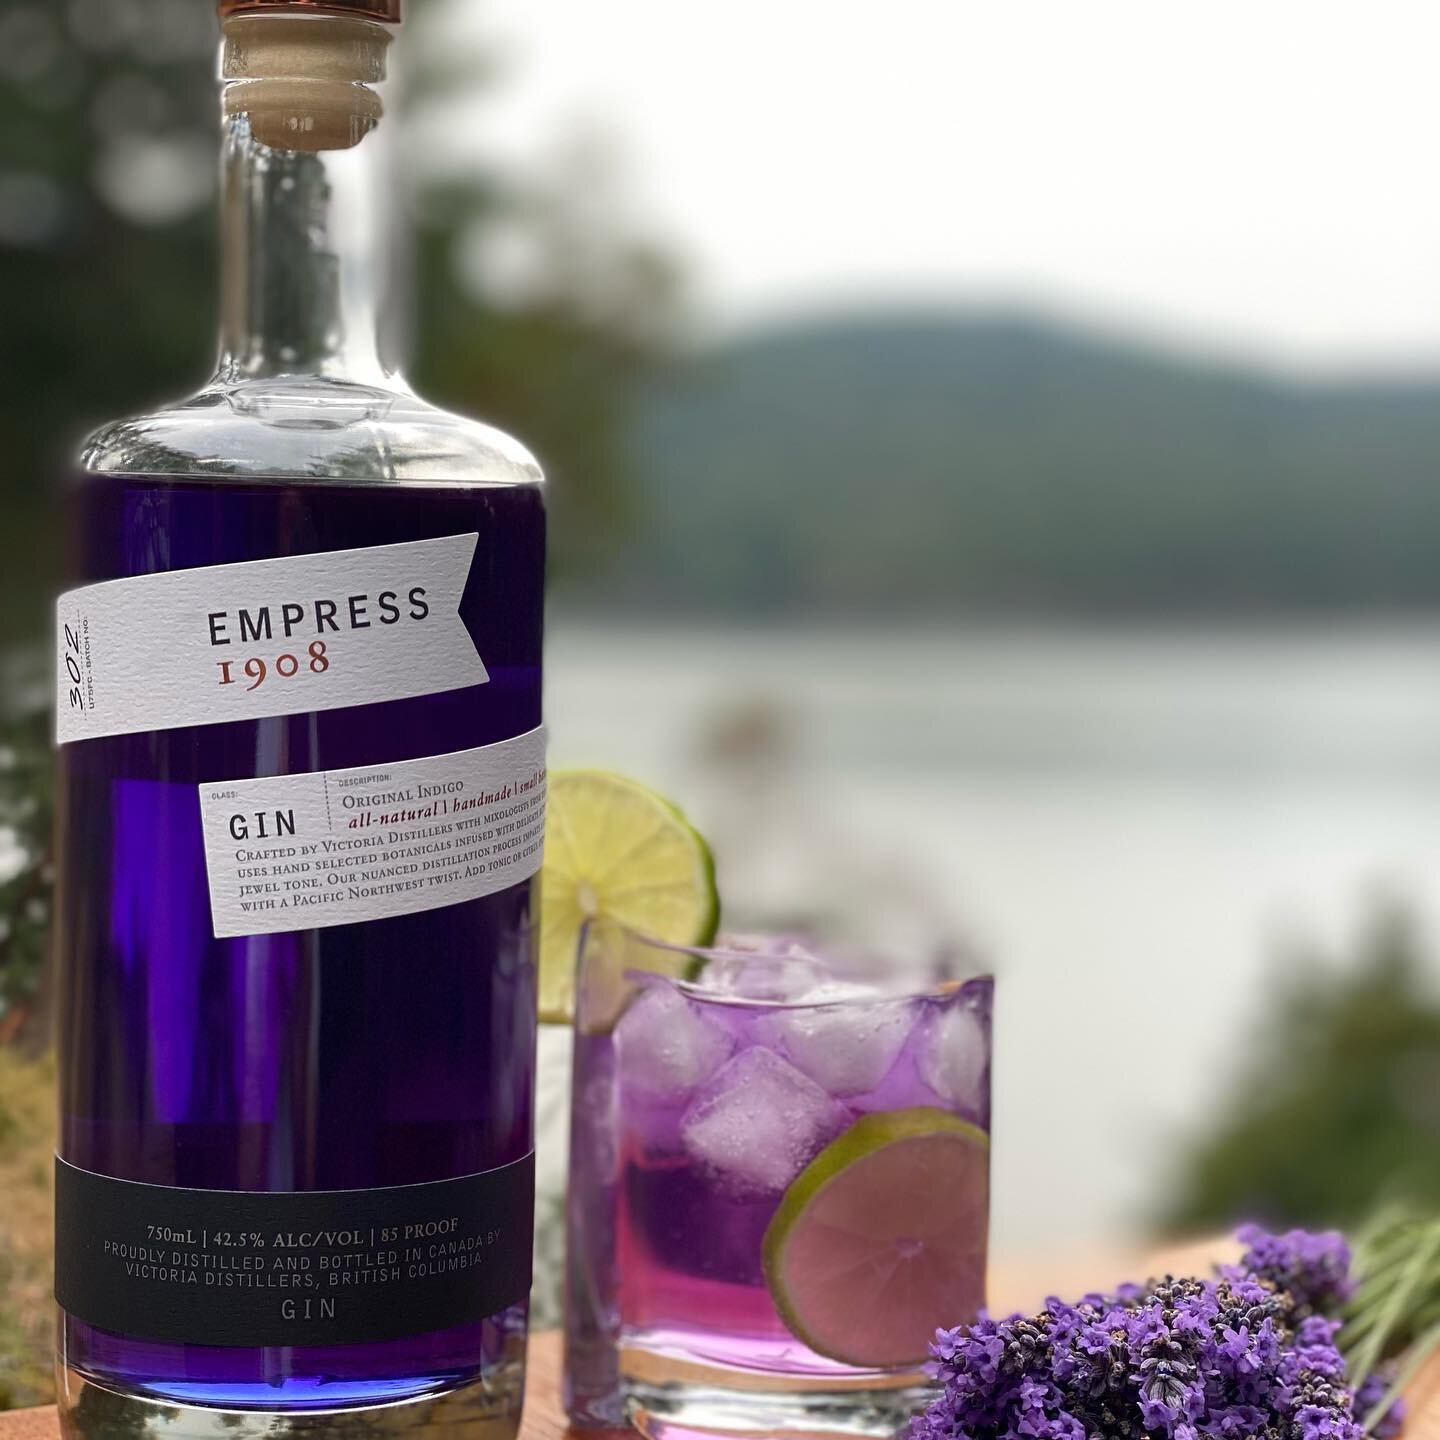 Make it a lavender day at Rosario with an Empress 1908 Gin Cocktail!  The Empress Hotel in Victoria and the Moran Mansion at Rosario were built at the same time.  Victoria Distillers honors the Empress with their unique gin made up of eight botanical